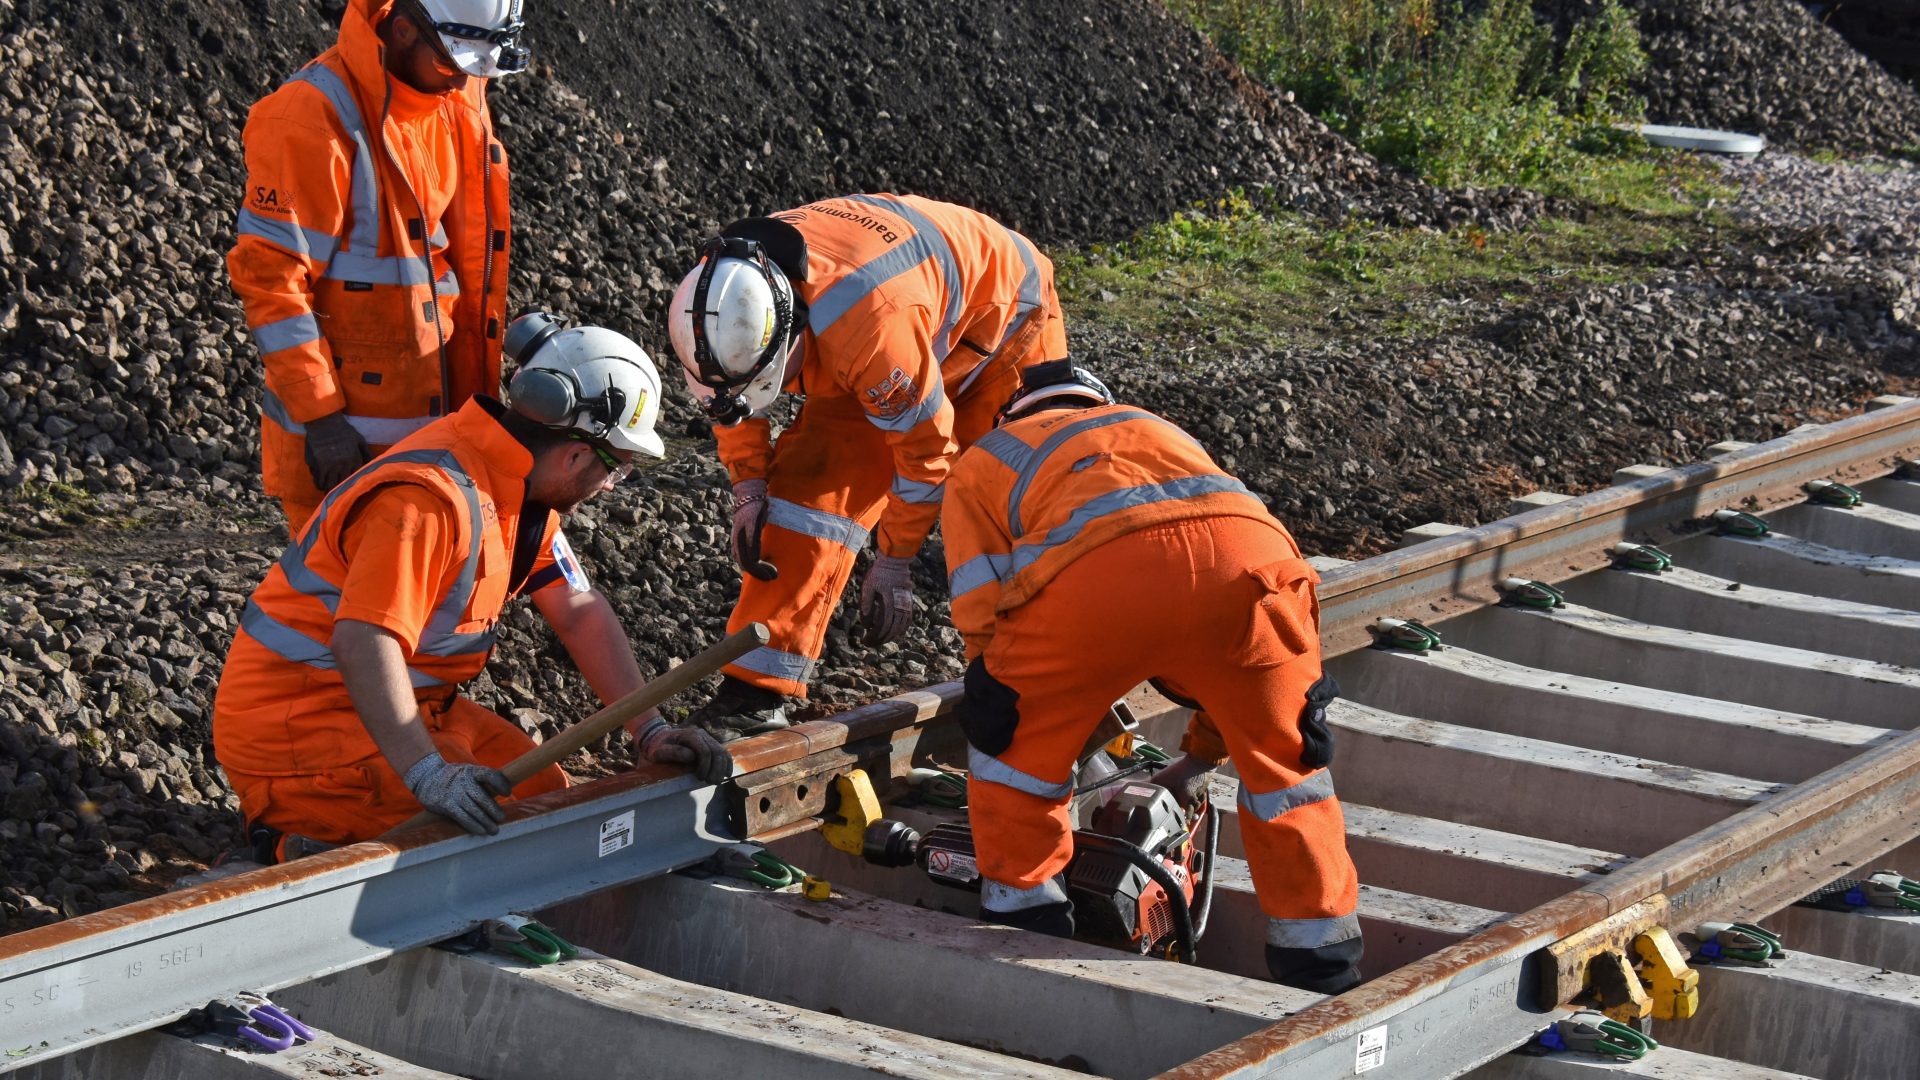 Why A0 drawings are commonly printed and used for construction on the UK rail network